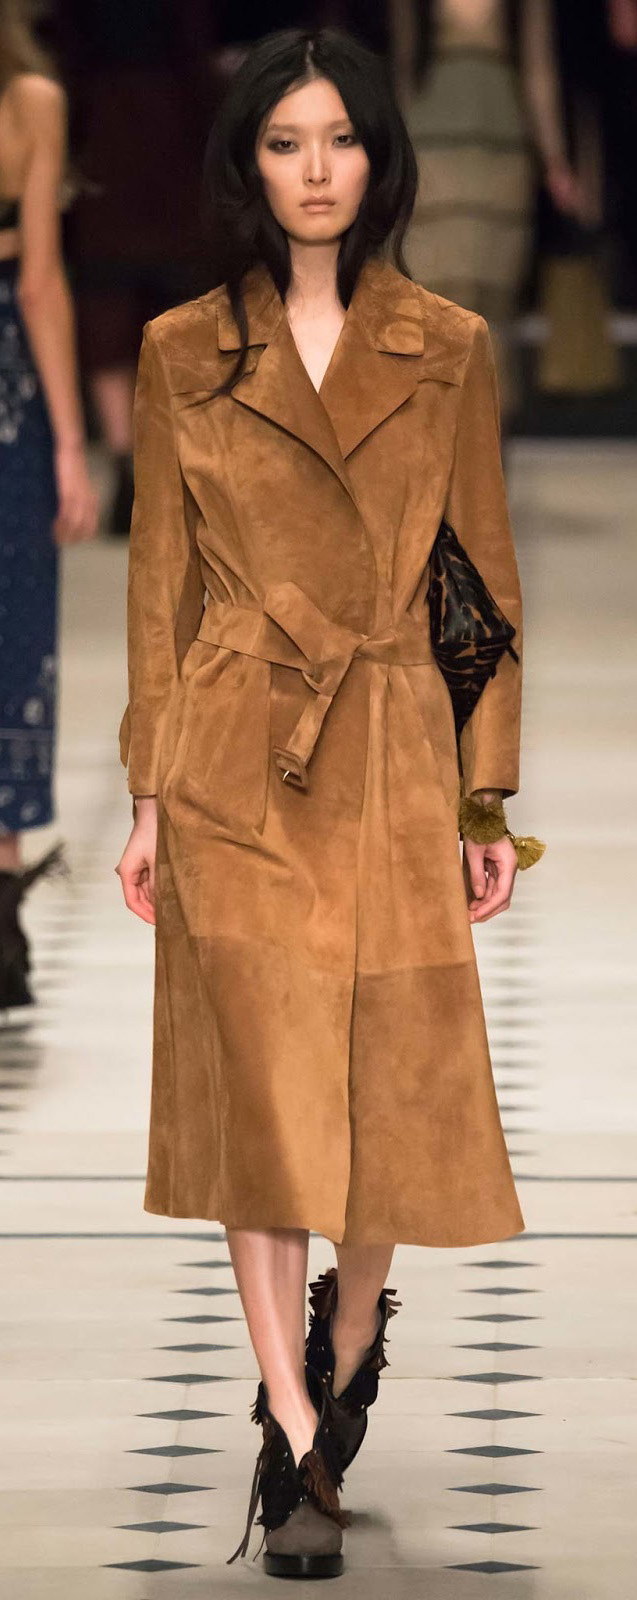 detail-classic-style-type-camel-suede-booties-trench-burberry-fall-2015.jpg